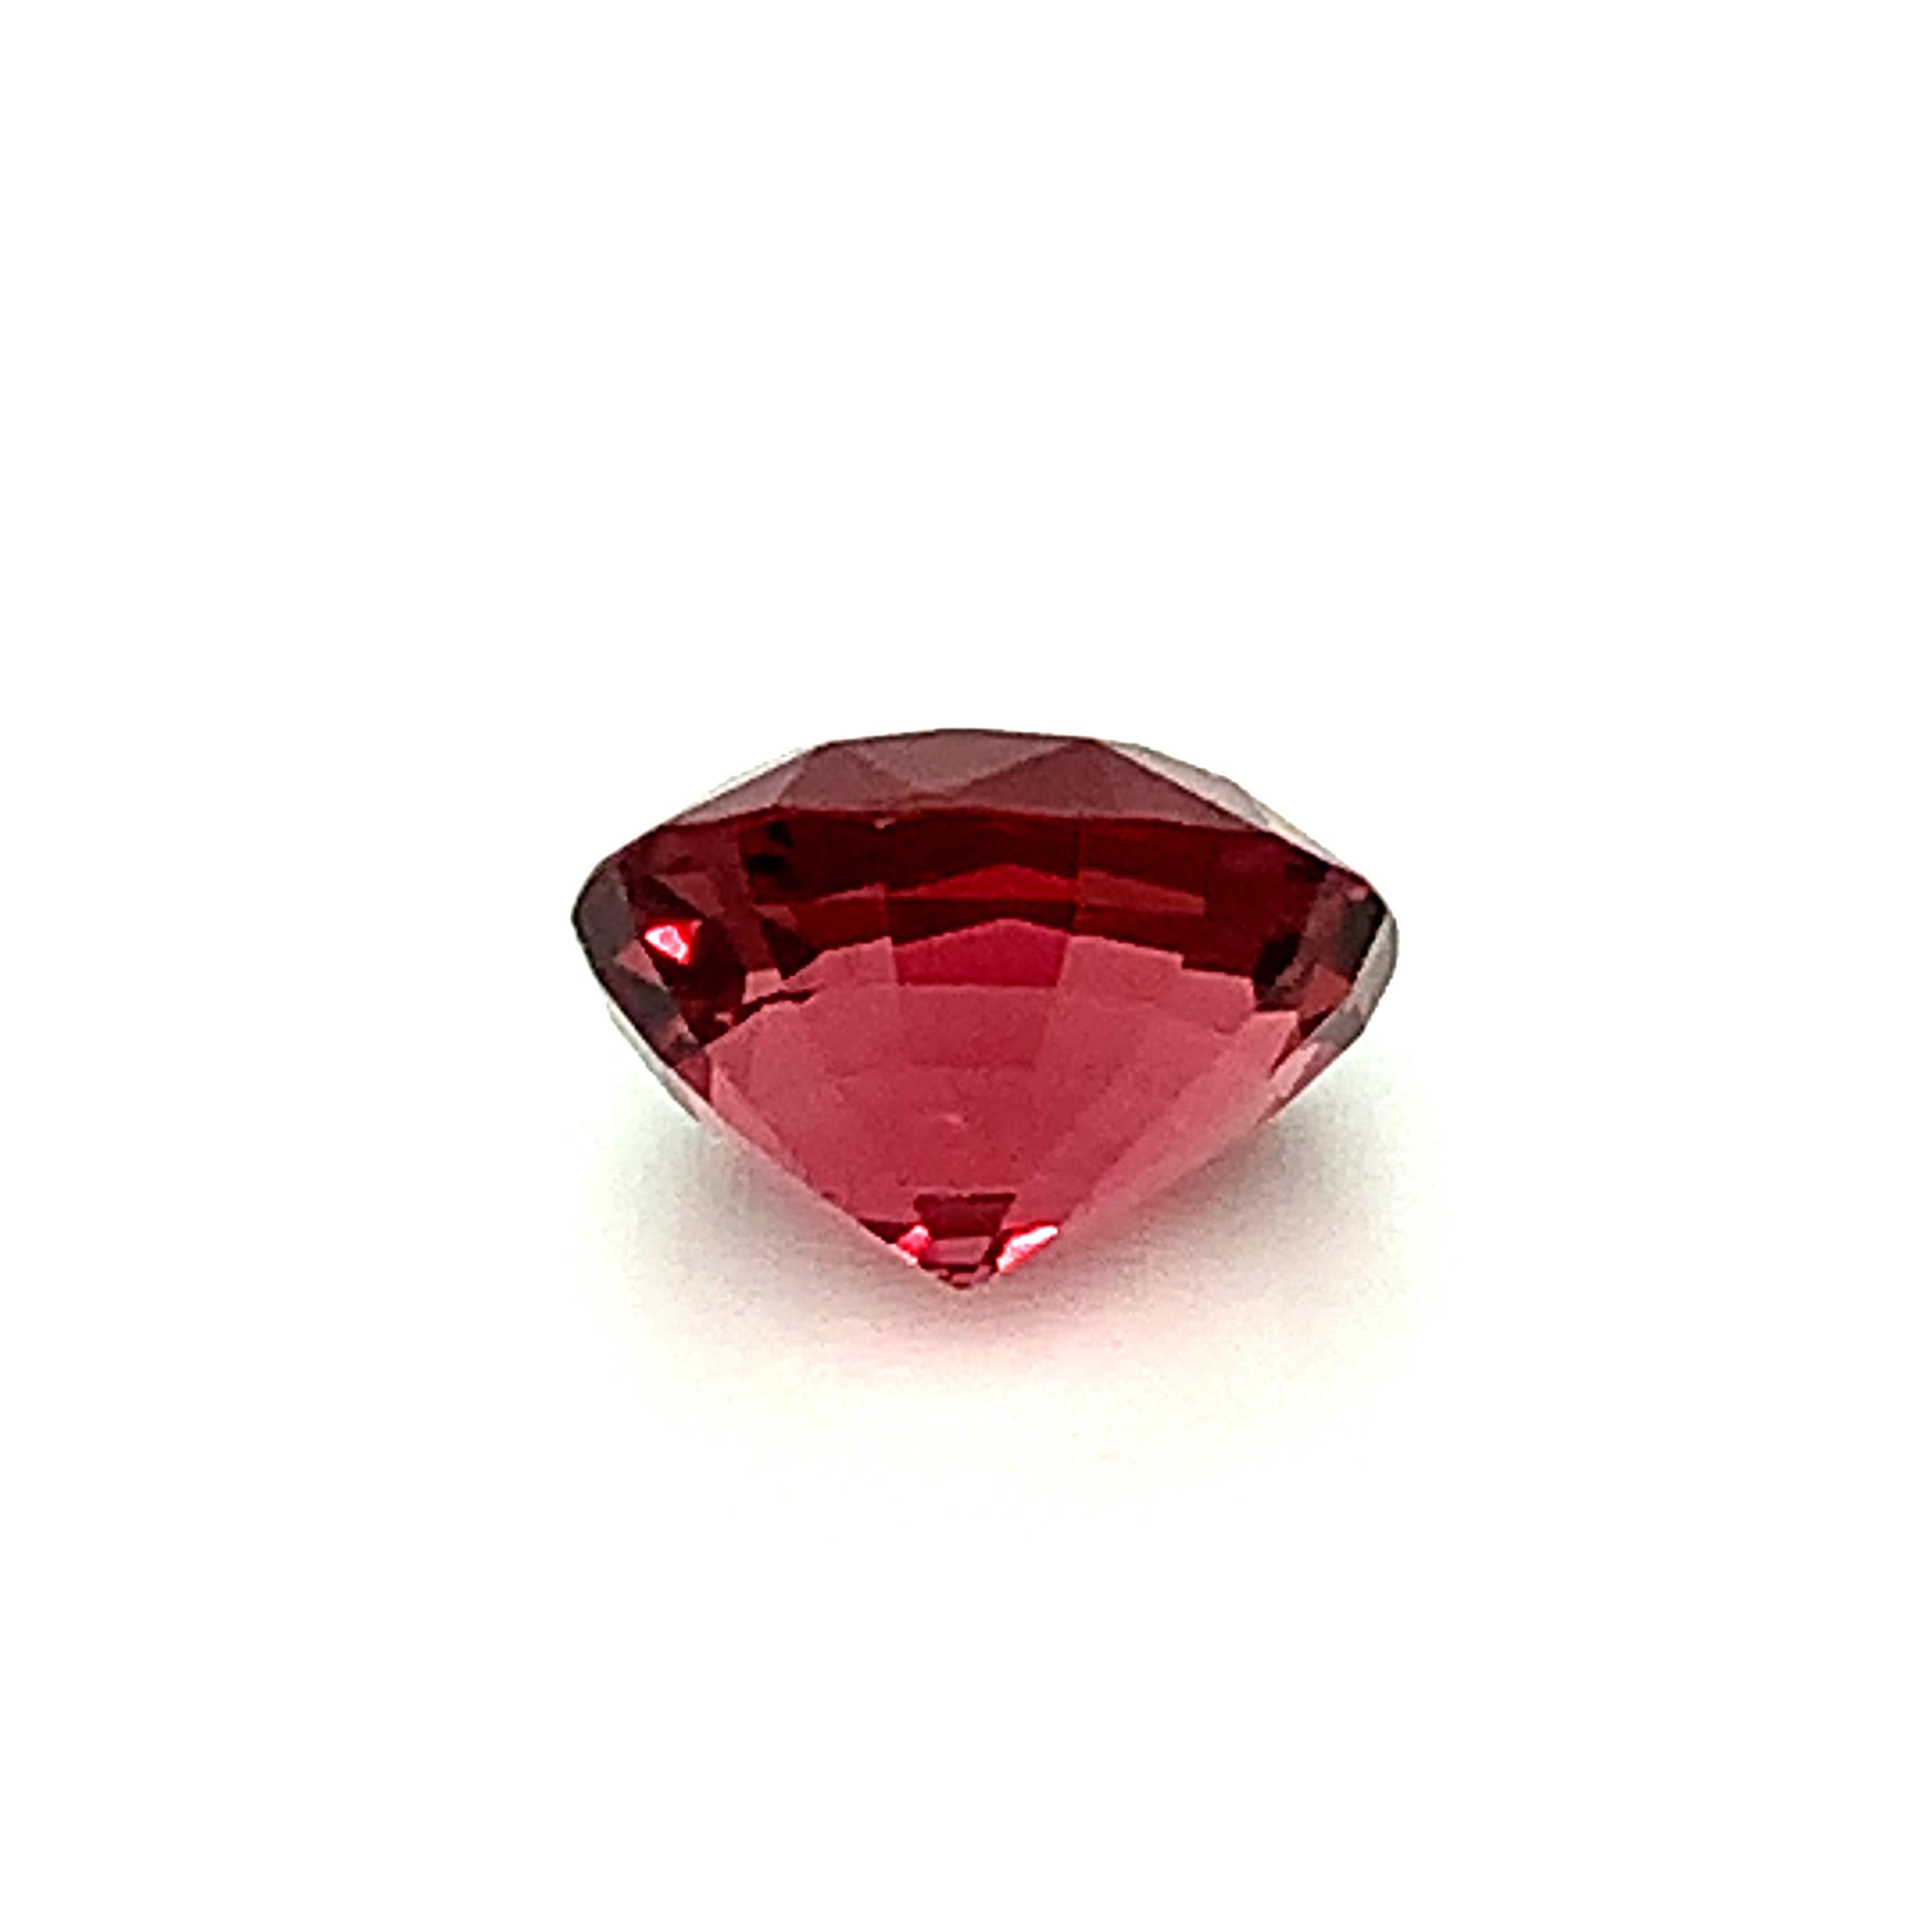 Artisan Unheated 5.14 Carat Red Spinel Oval, Unset Loose Gemstone, GIA Certified